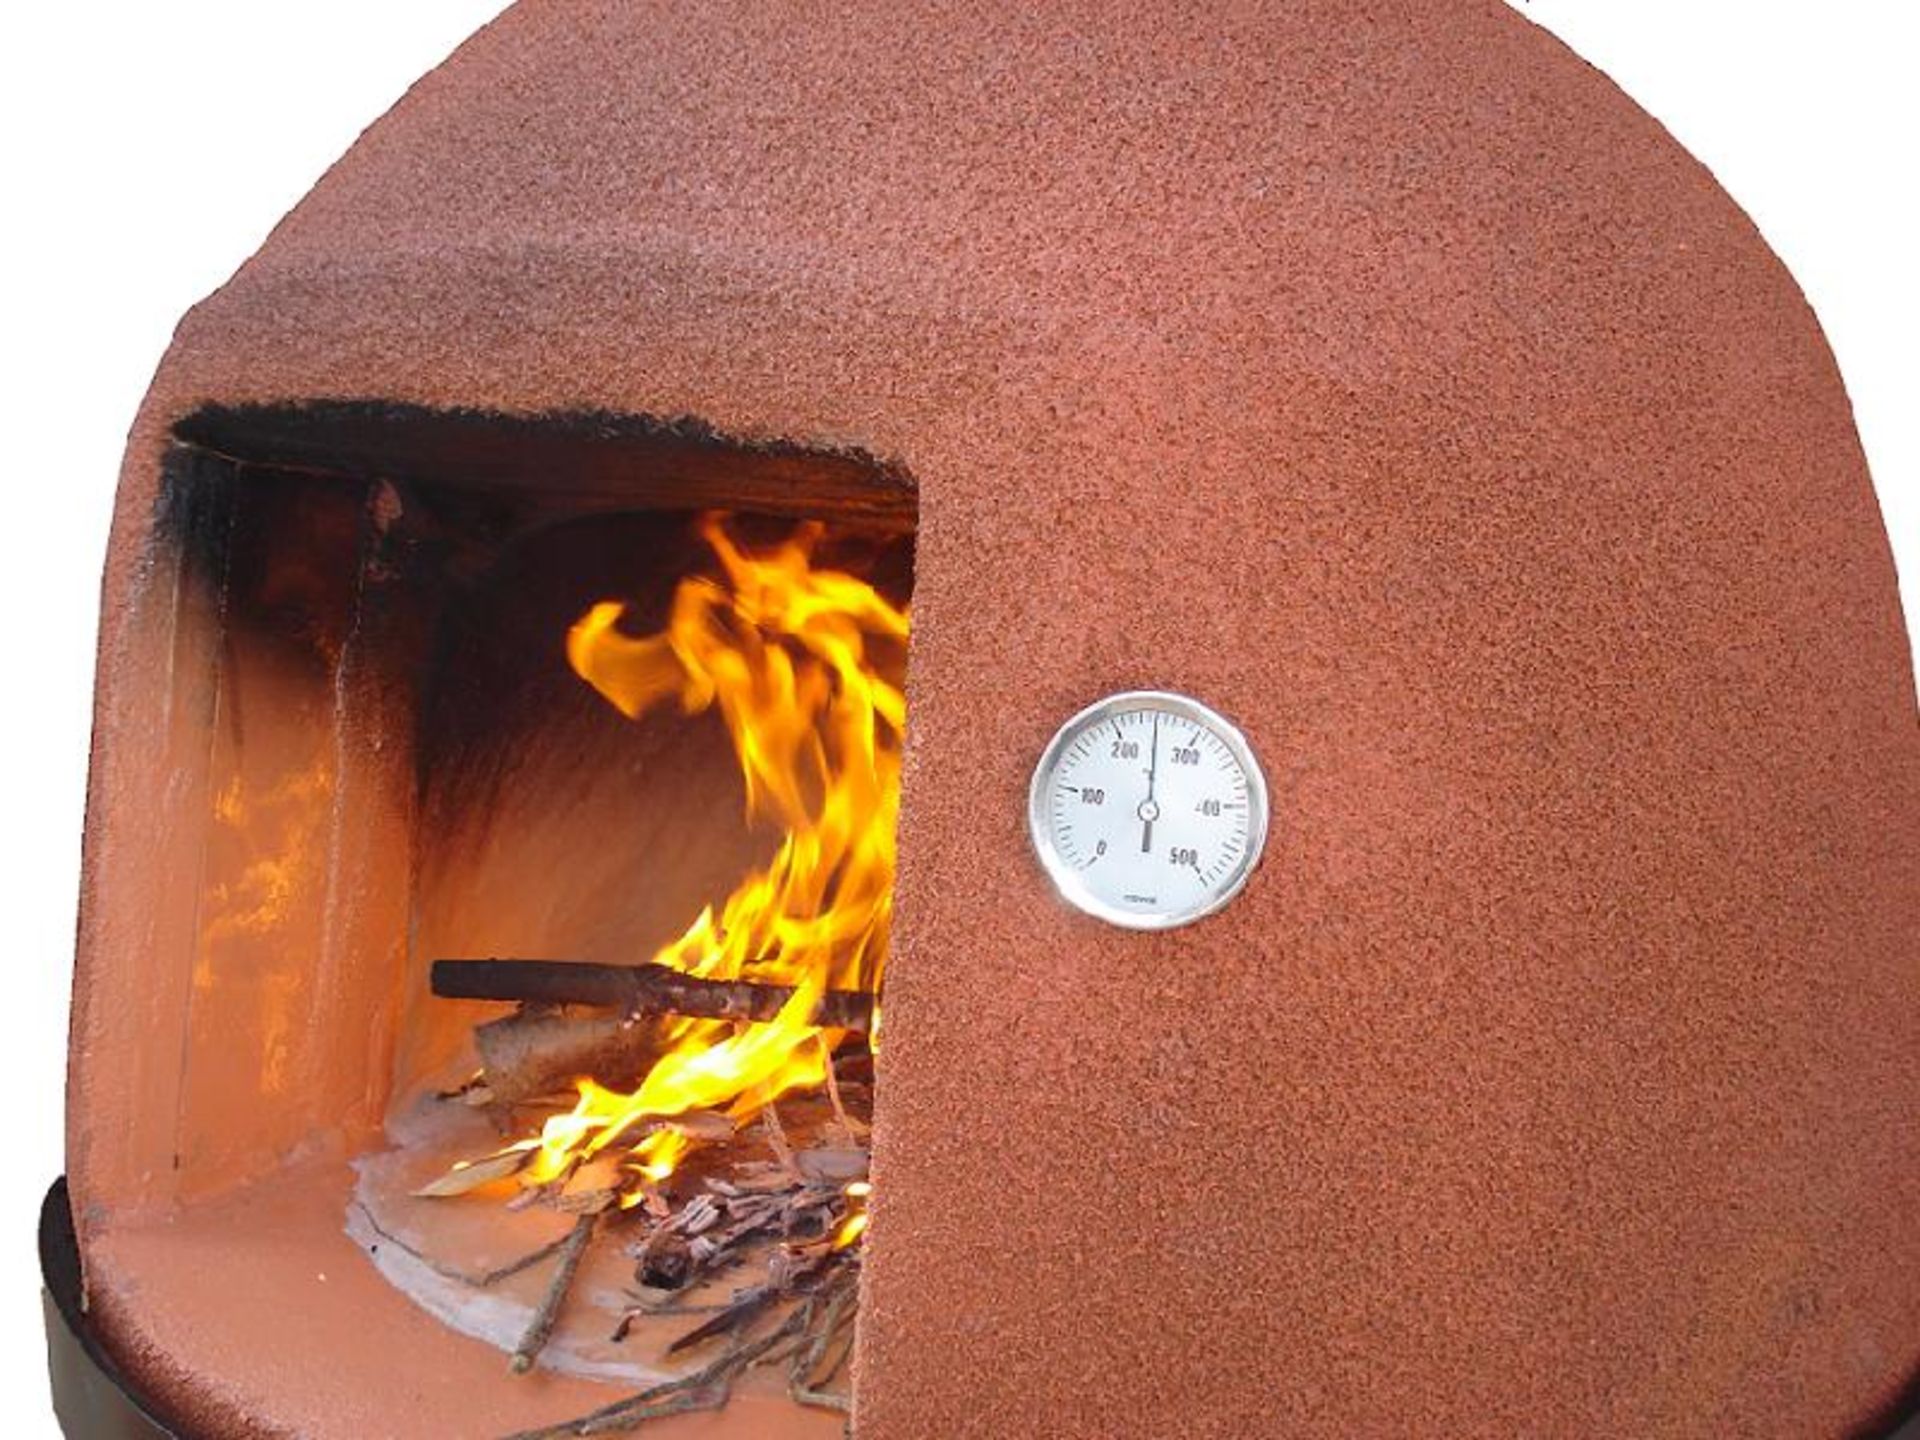 Beehive Wood Fired Pizza Oven, Insulated Construction, 27.5" Interior diameter, 35" Exterior - Image 5 of 7